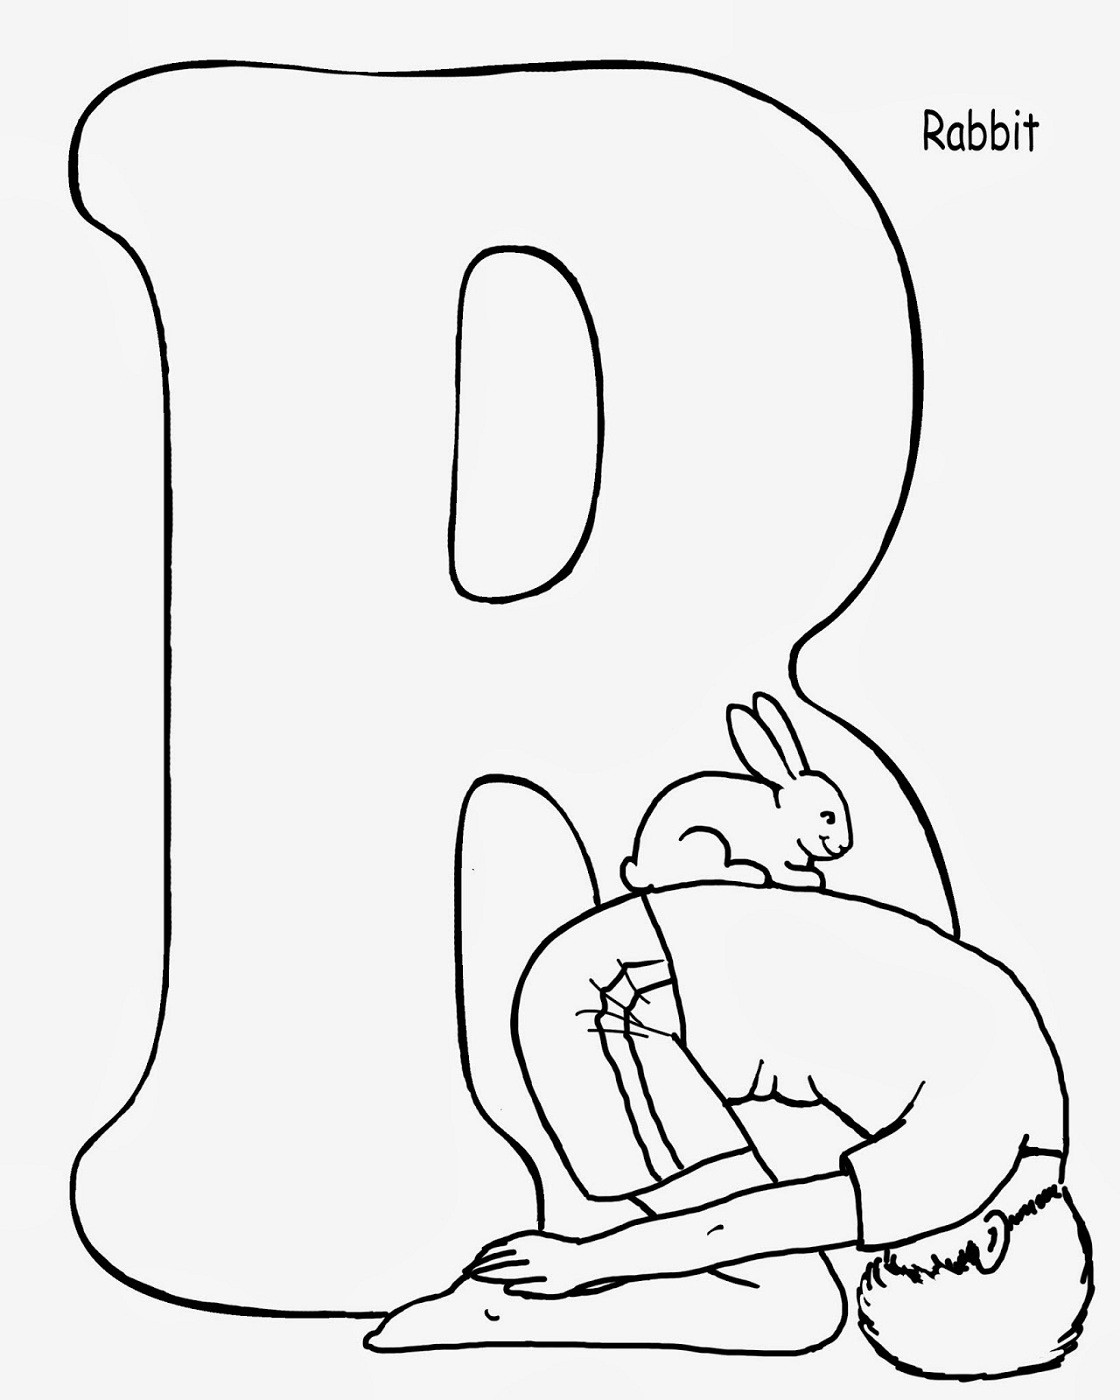 Coloring Sheet For Toddlers
 Yoga Coloring Pages to Print